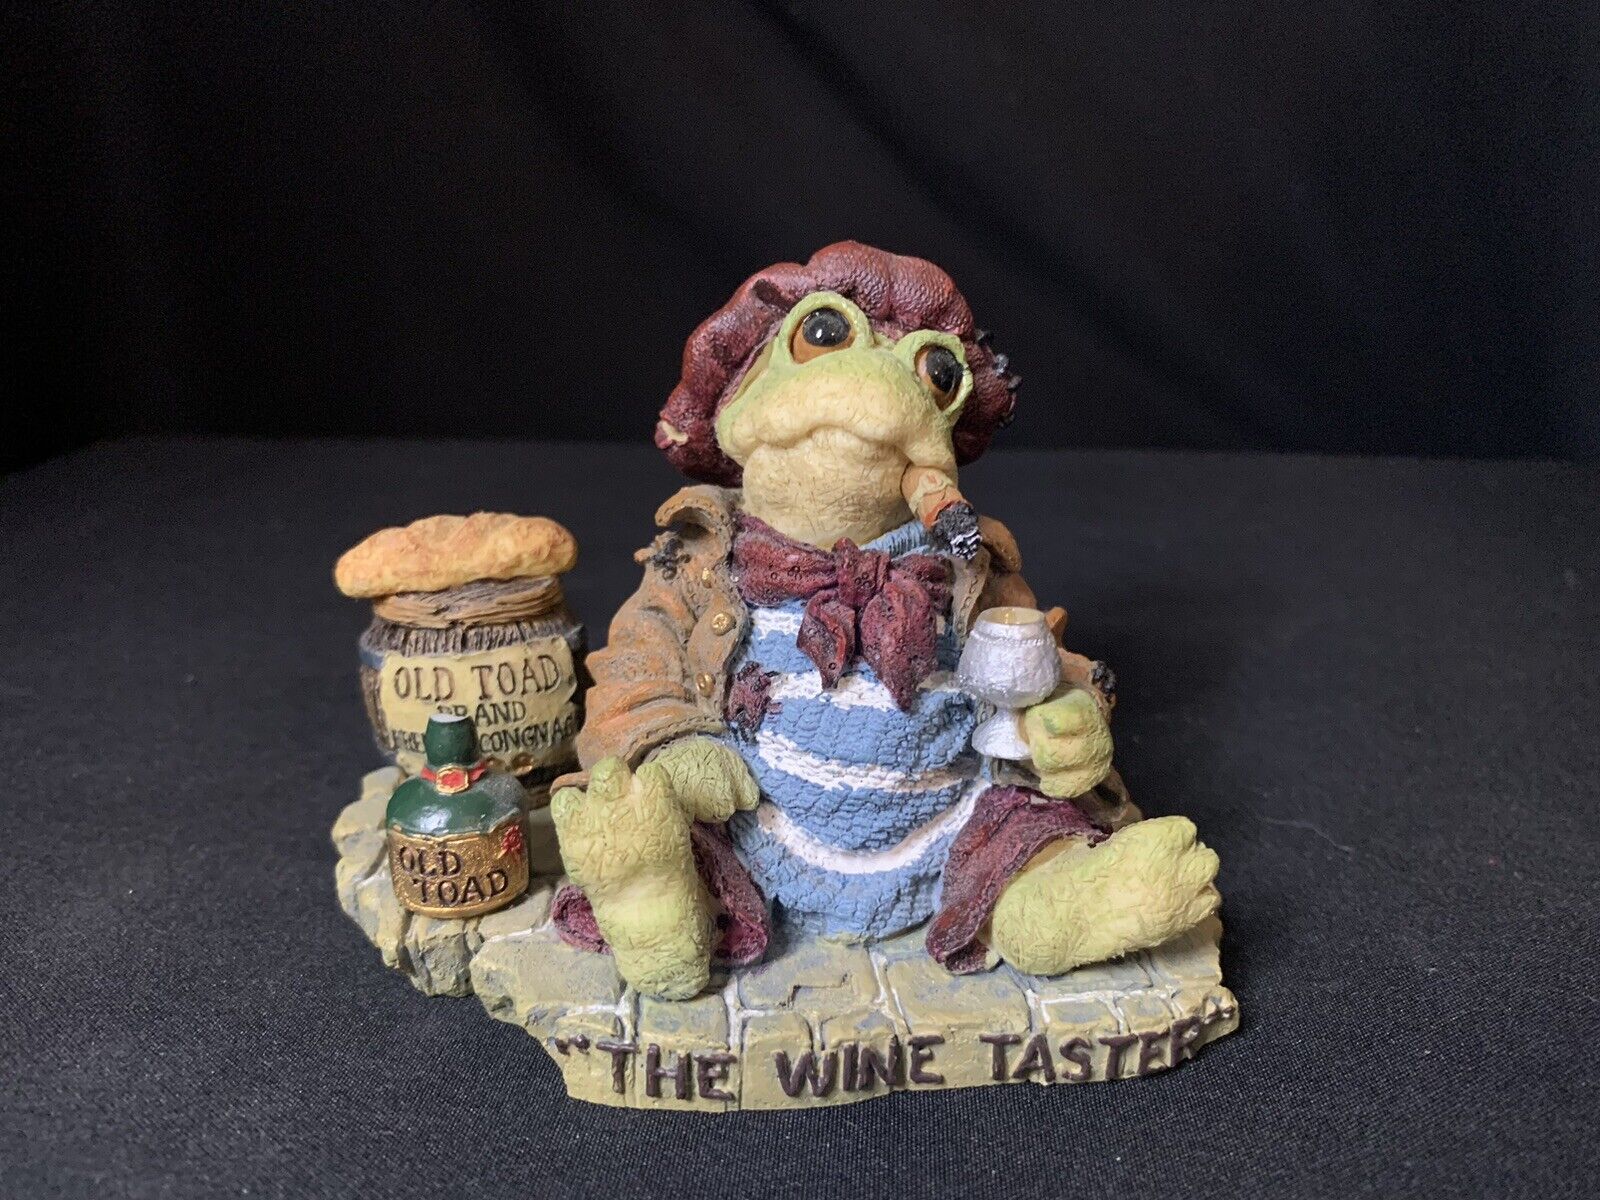 Boyds Bears “The Wine Taster” Frog Jacques Grenouille Figurine 1998 #36702